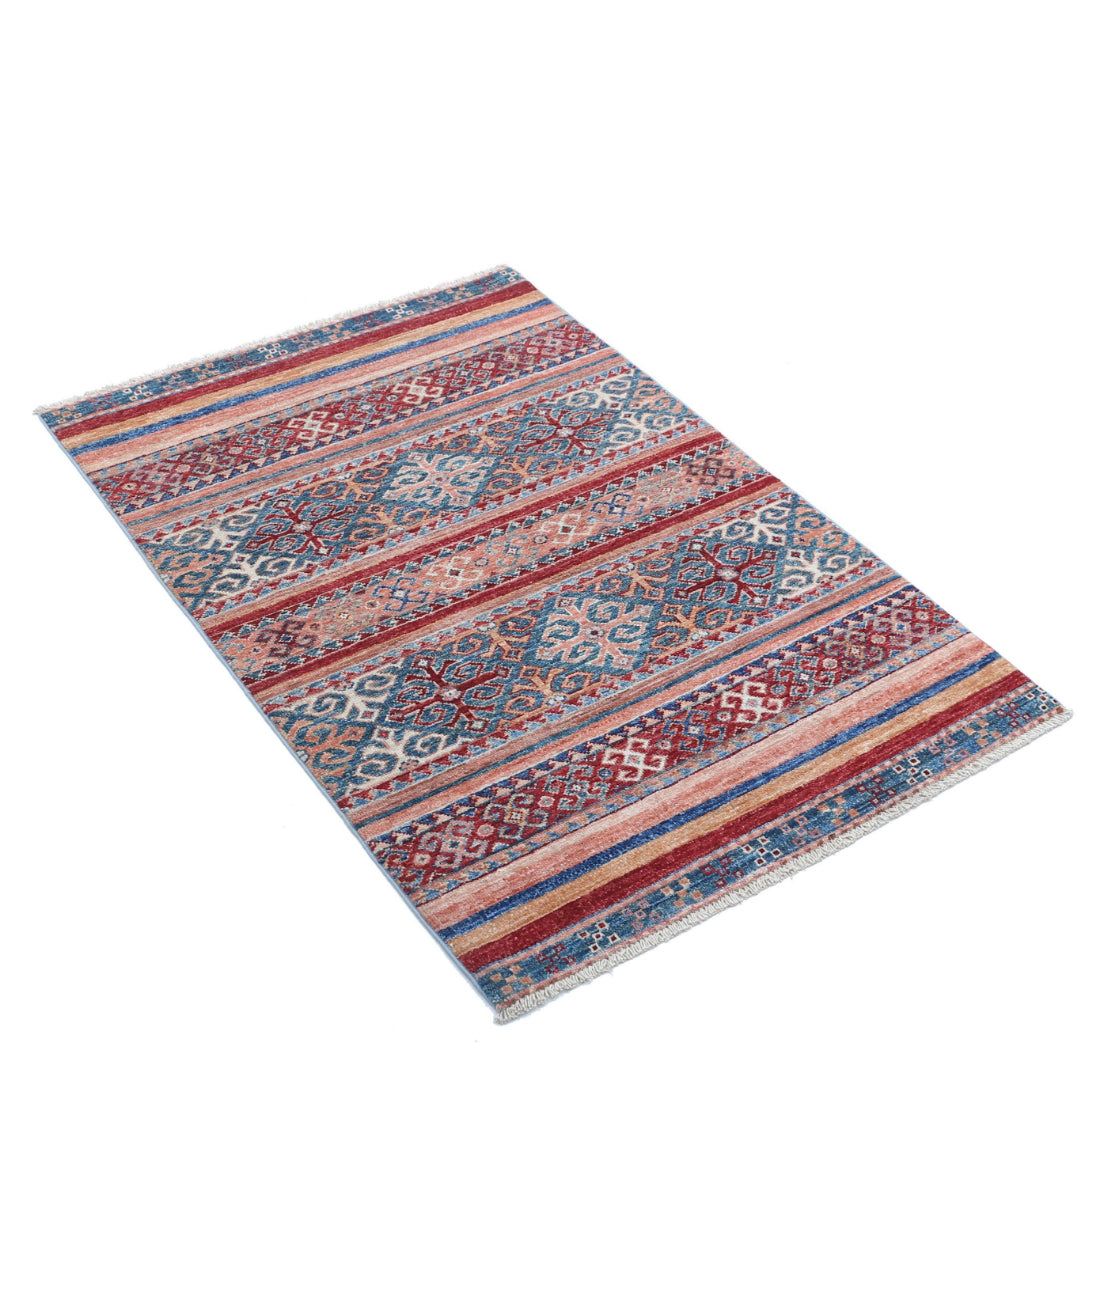 Hand Knotted Khurjeen Wool Rug - 2'8'' x 3'10'' 2'8'' x 3'10'' (80 X 115) / Multi / Multi